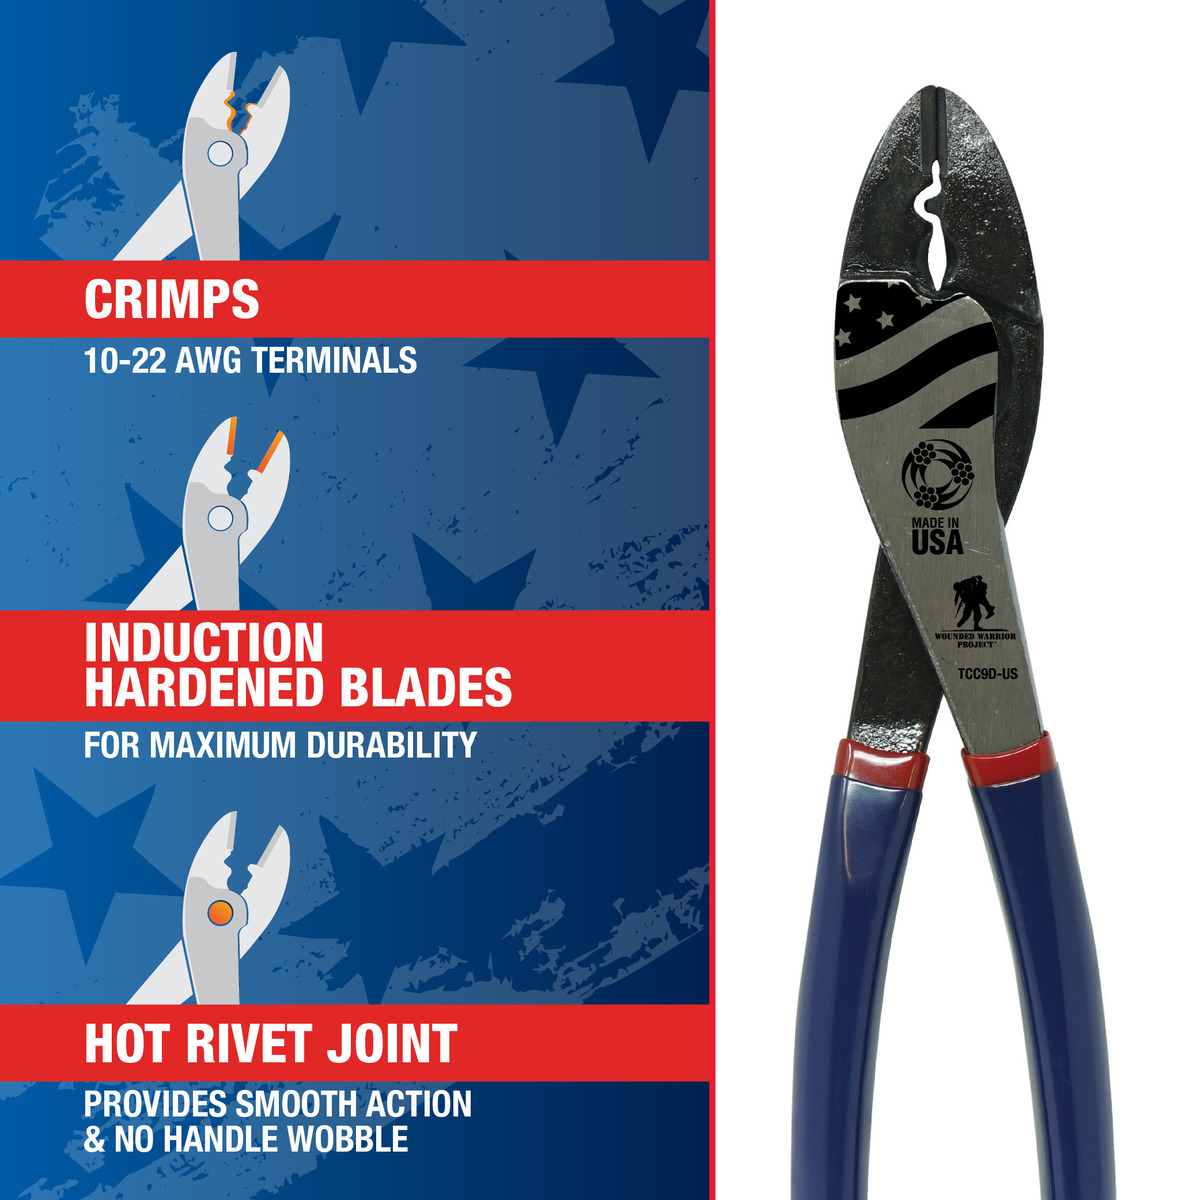 USA Terminal Crimper & Cutter - Wounded Warrior Project® 